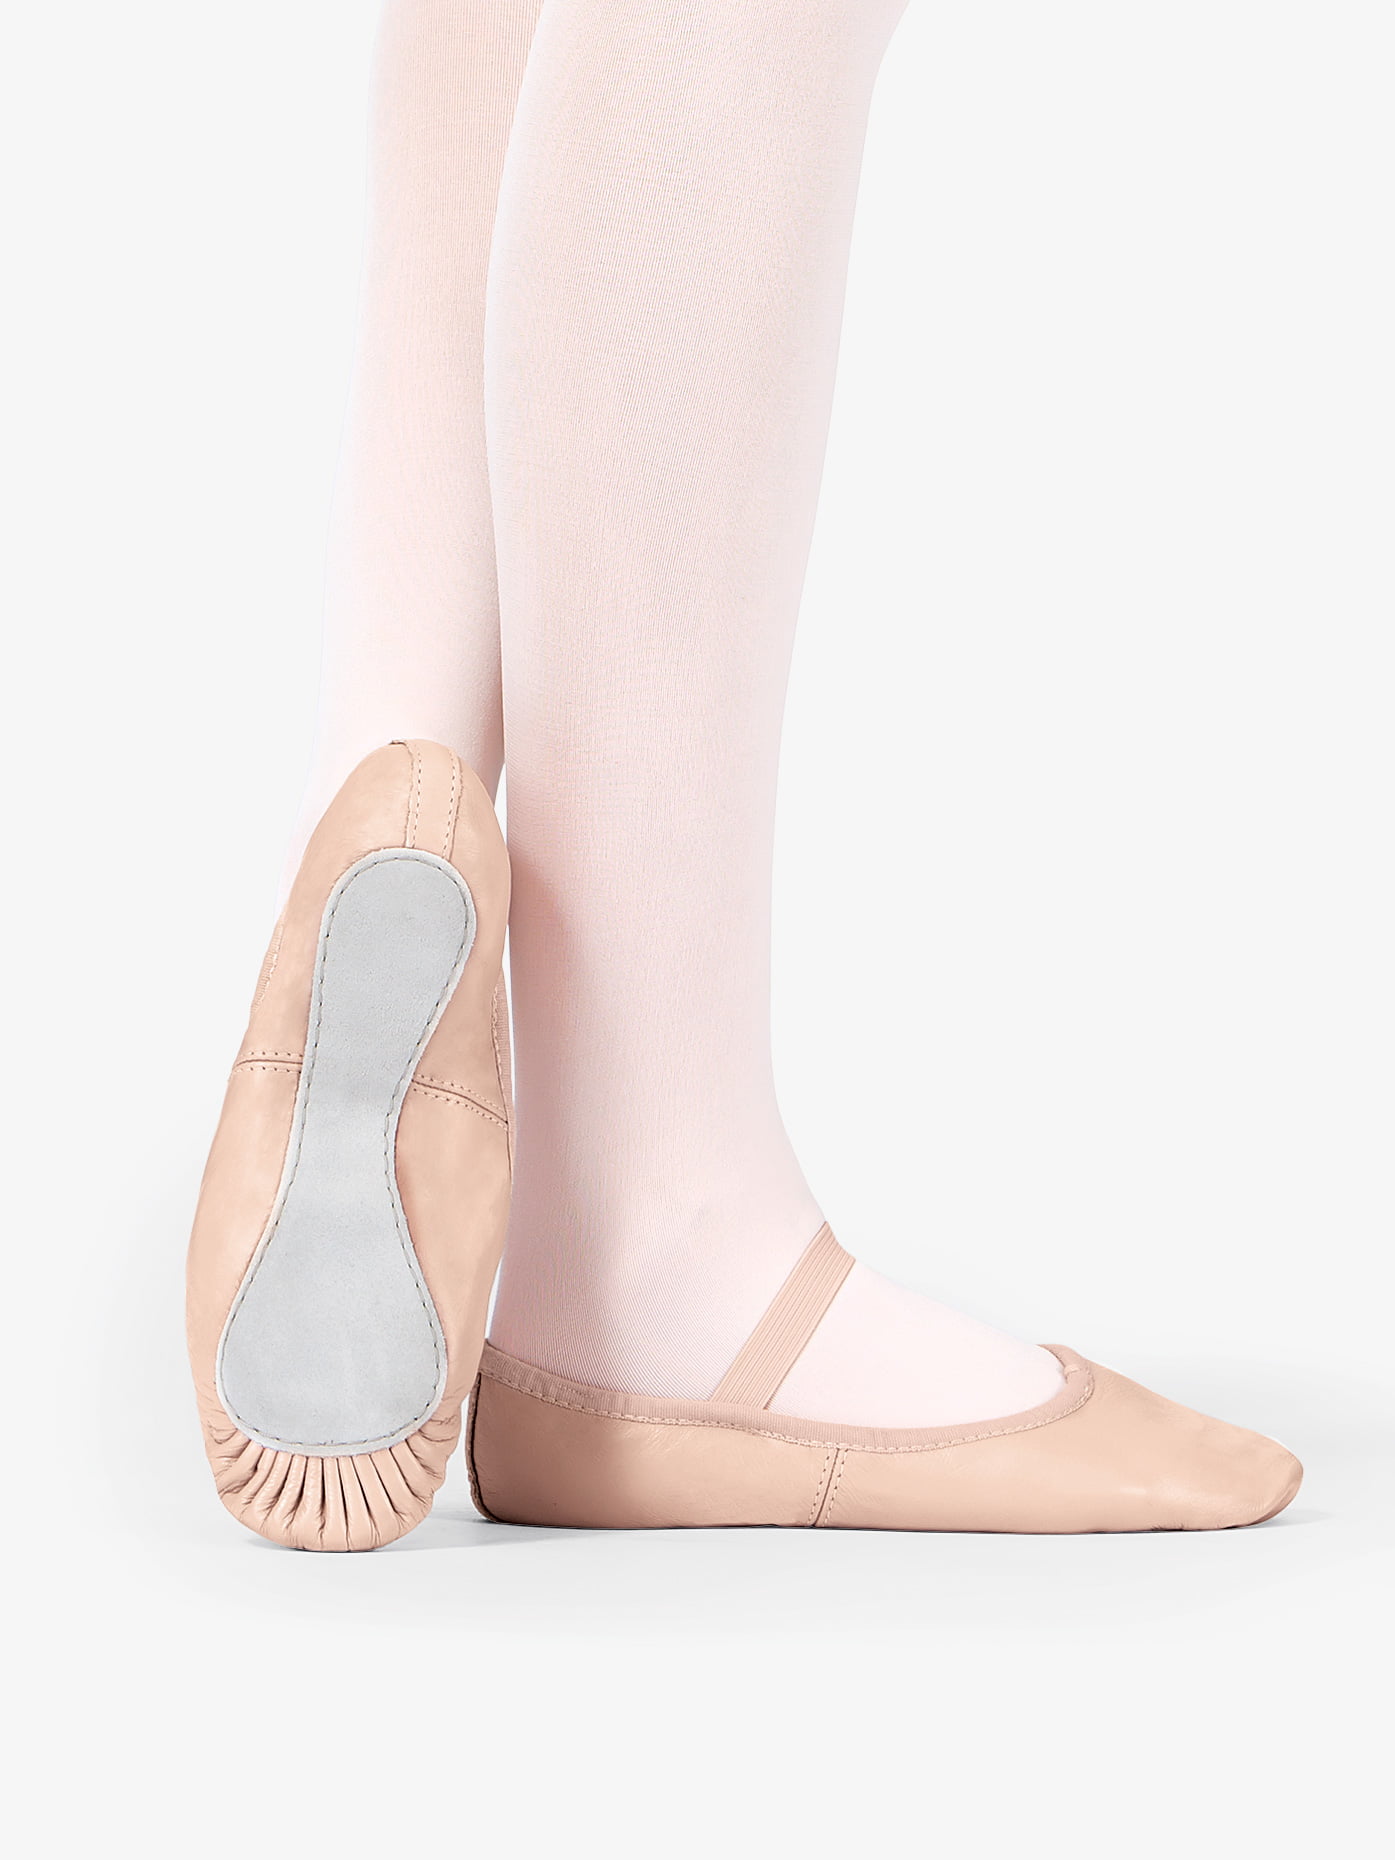 White Leather Ballet Shoes with Full Suede Sole 